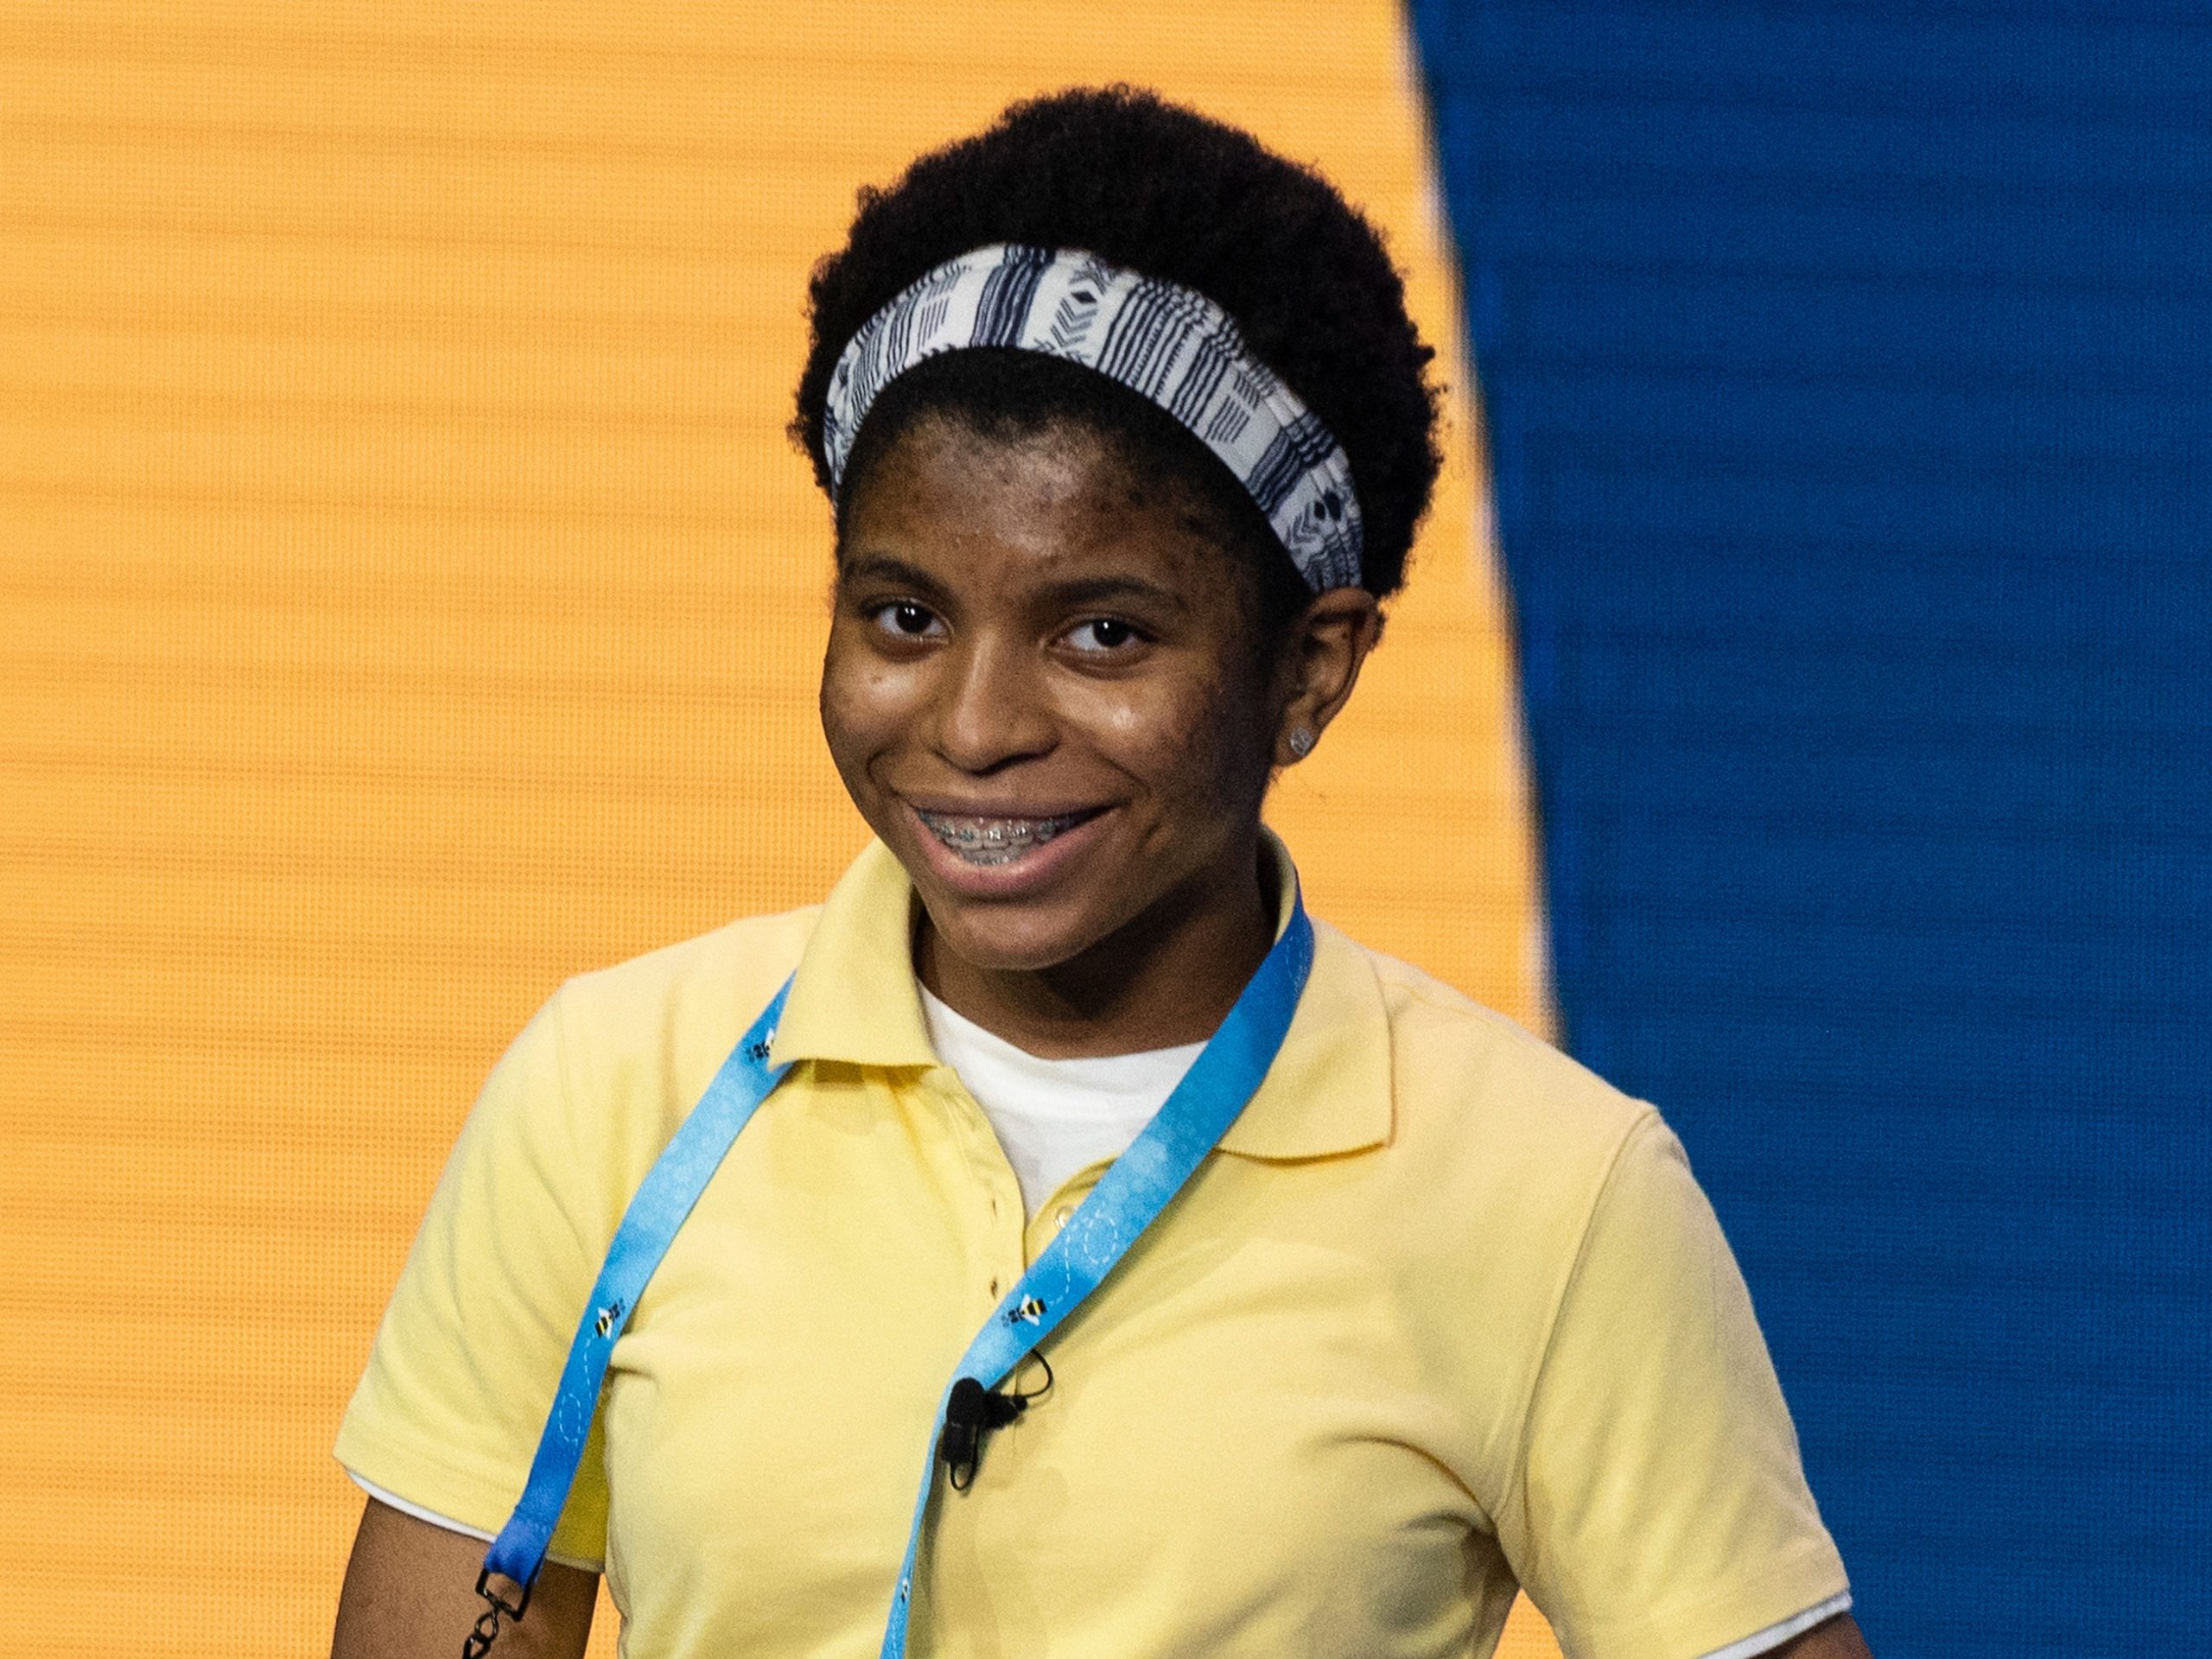 Zaila Avant-garde competes in the Scripps National Spelling Bee finals in Orlando, Florida, July 8, 2021.